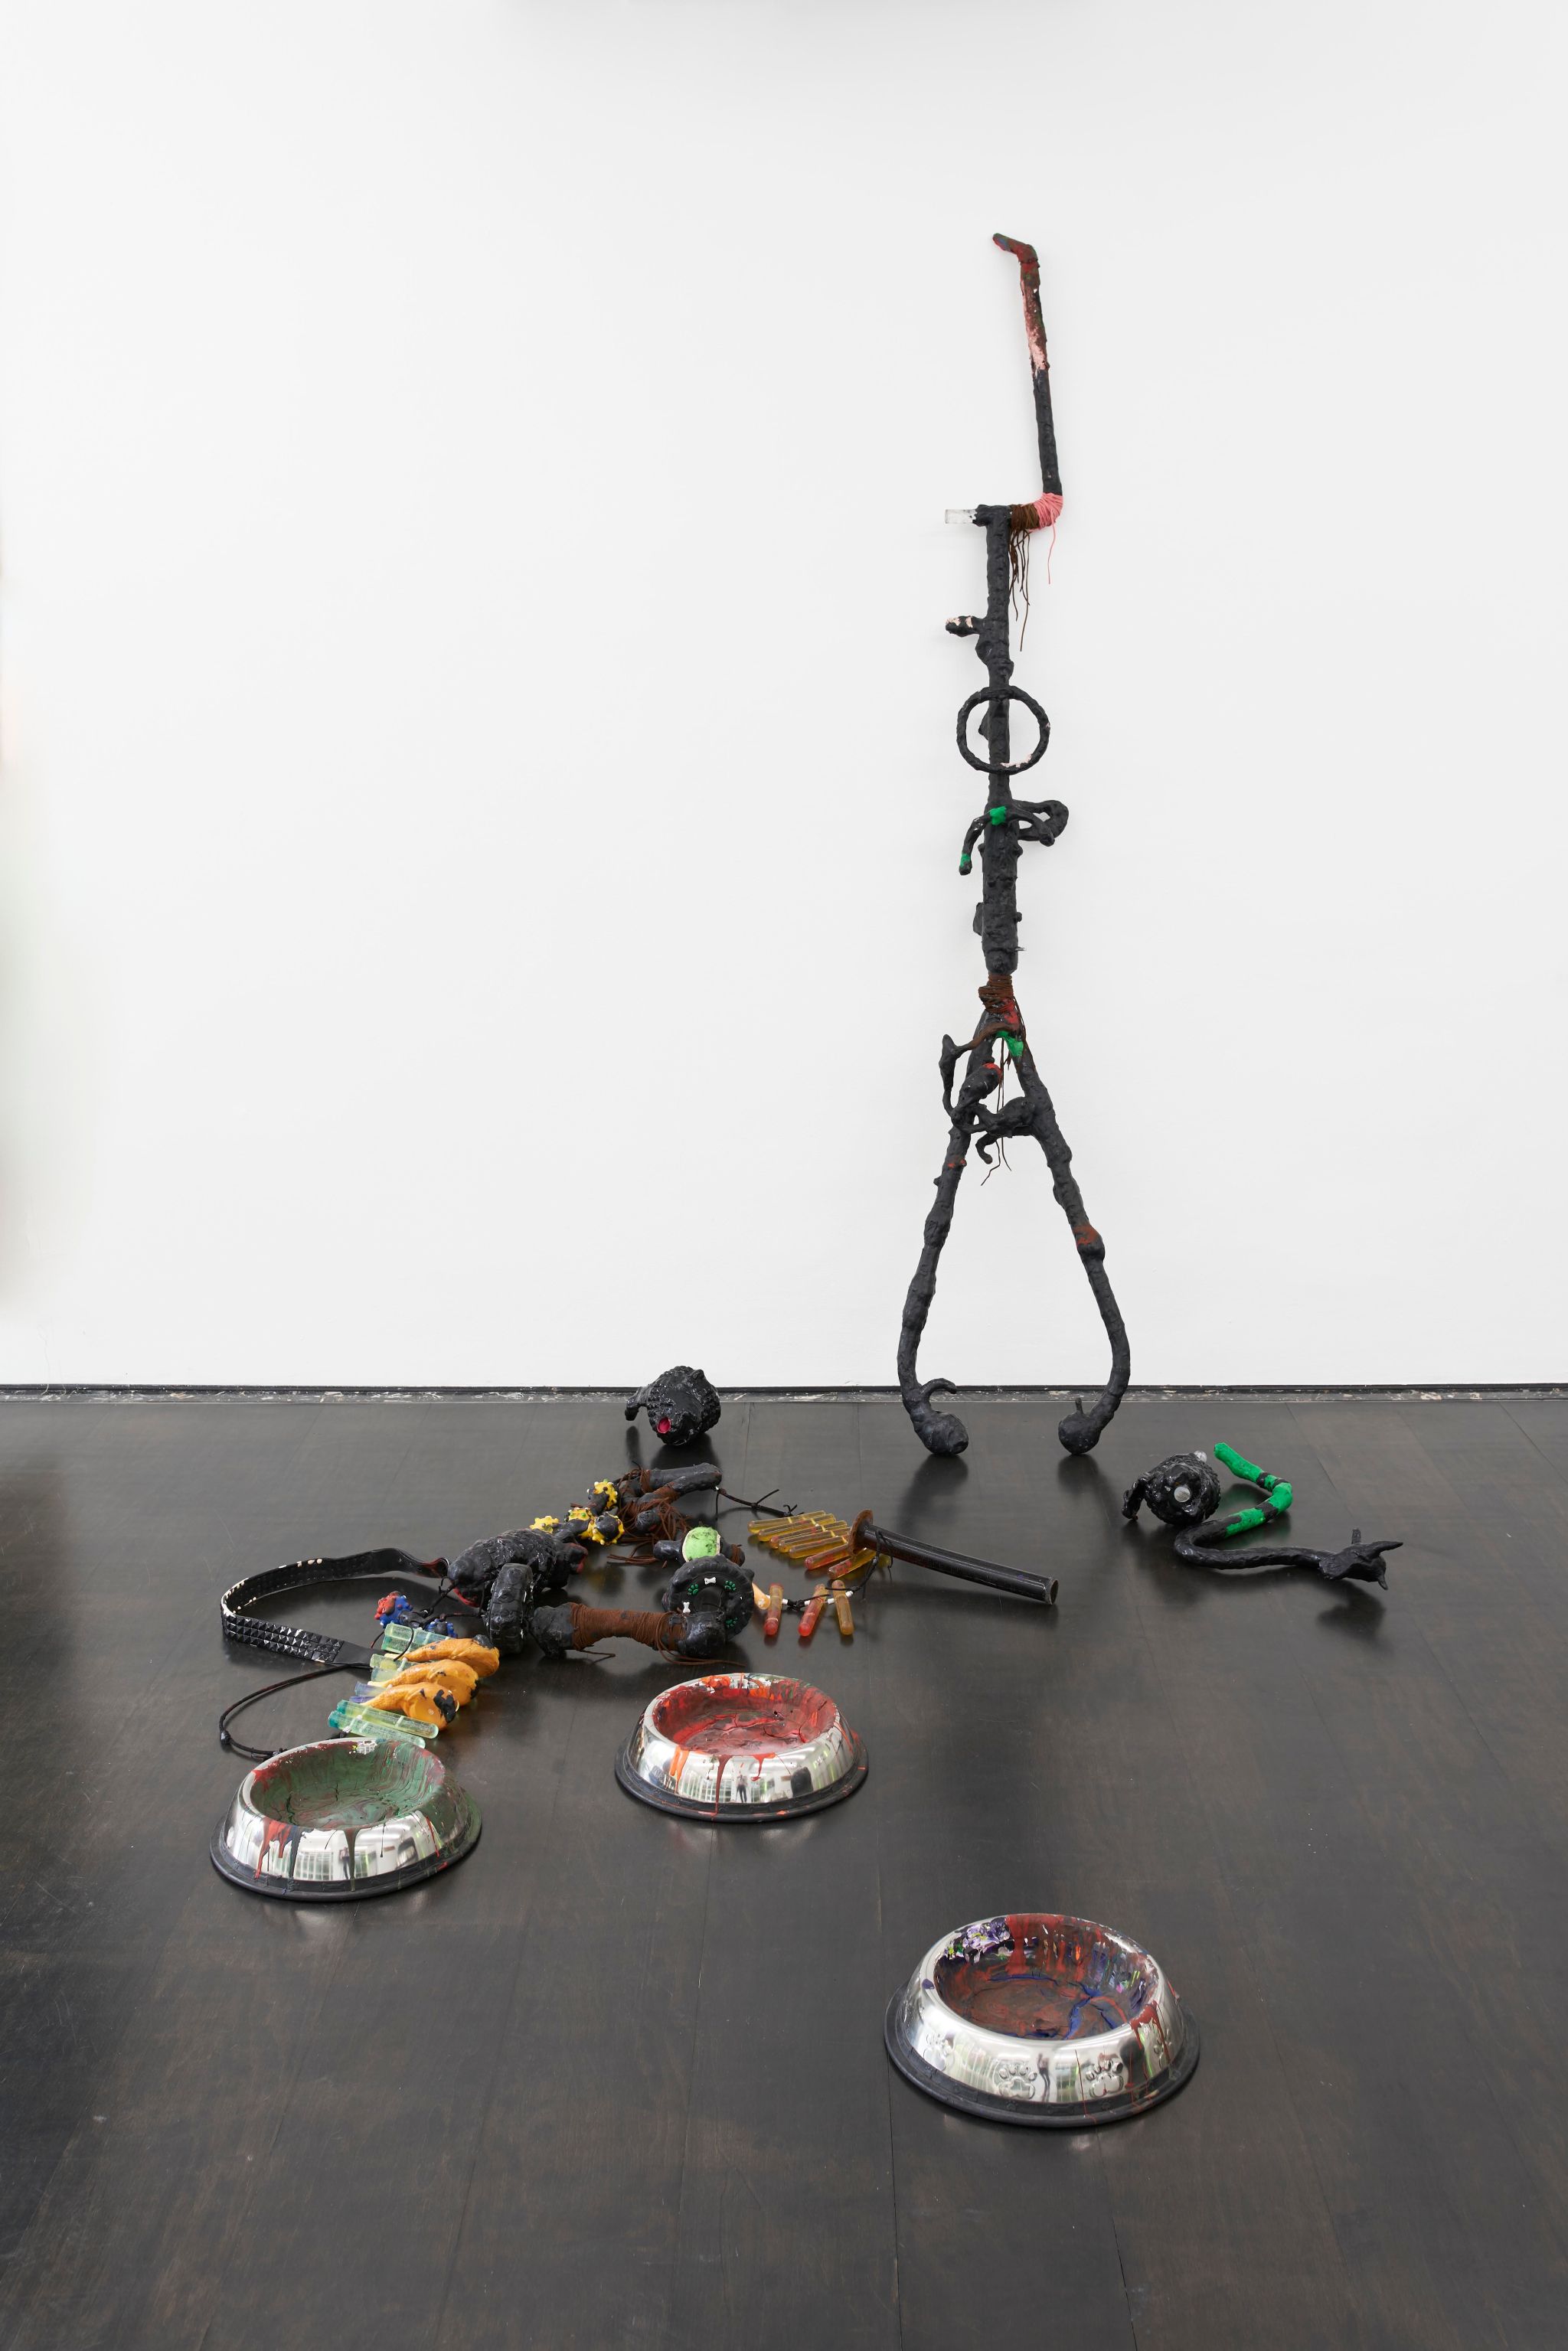 KAYA (Kerstin Braetsch & Debo Eilers), _KAYA_YONAH YOHO Necklace (healing performance for a sick painting), 2019, Epoxy, color paint, belts, acrylic rod, rope, wire, rope, duct tape, objects, aluminium bowls, Dimensions variable